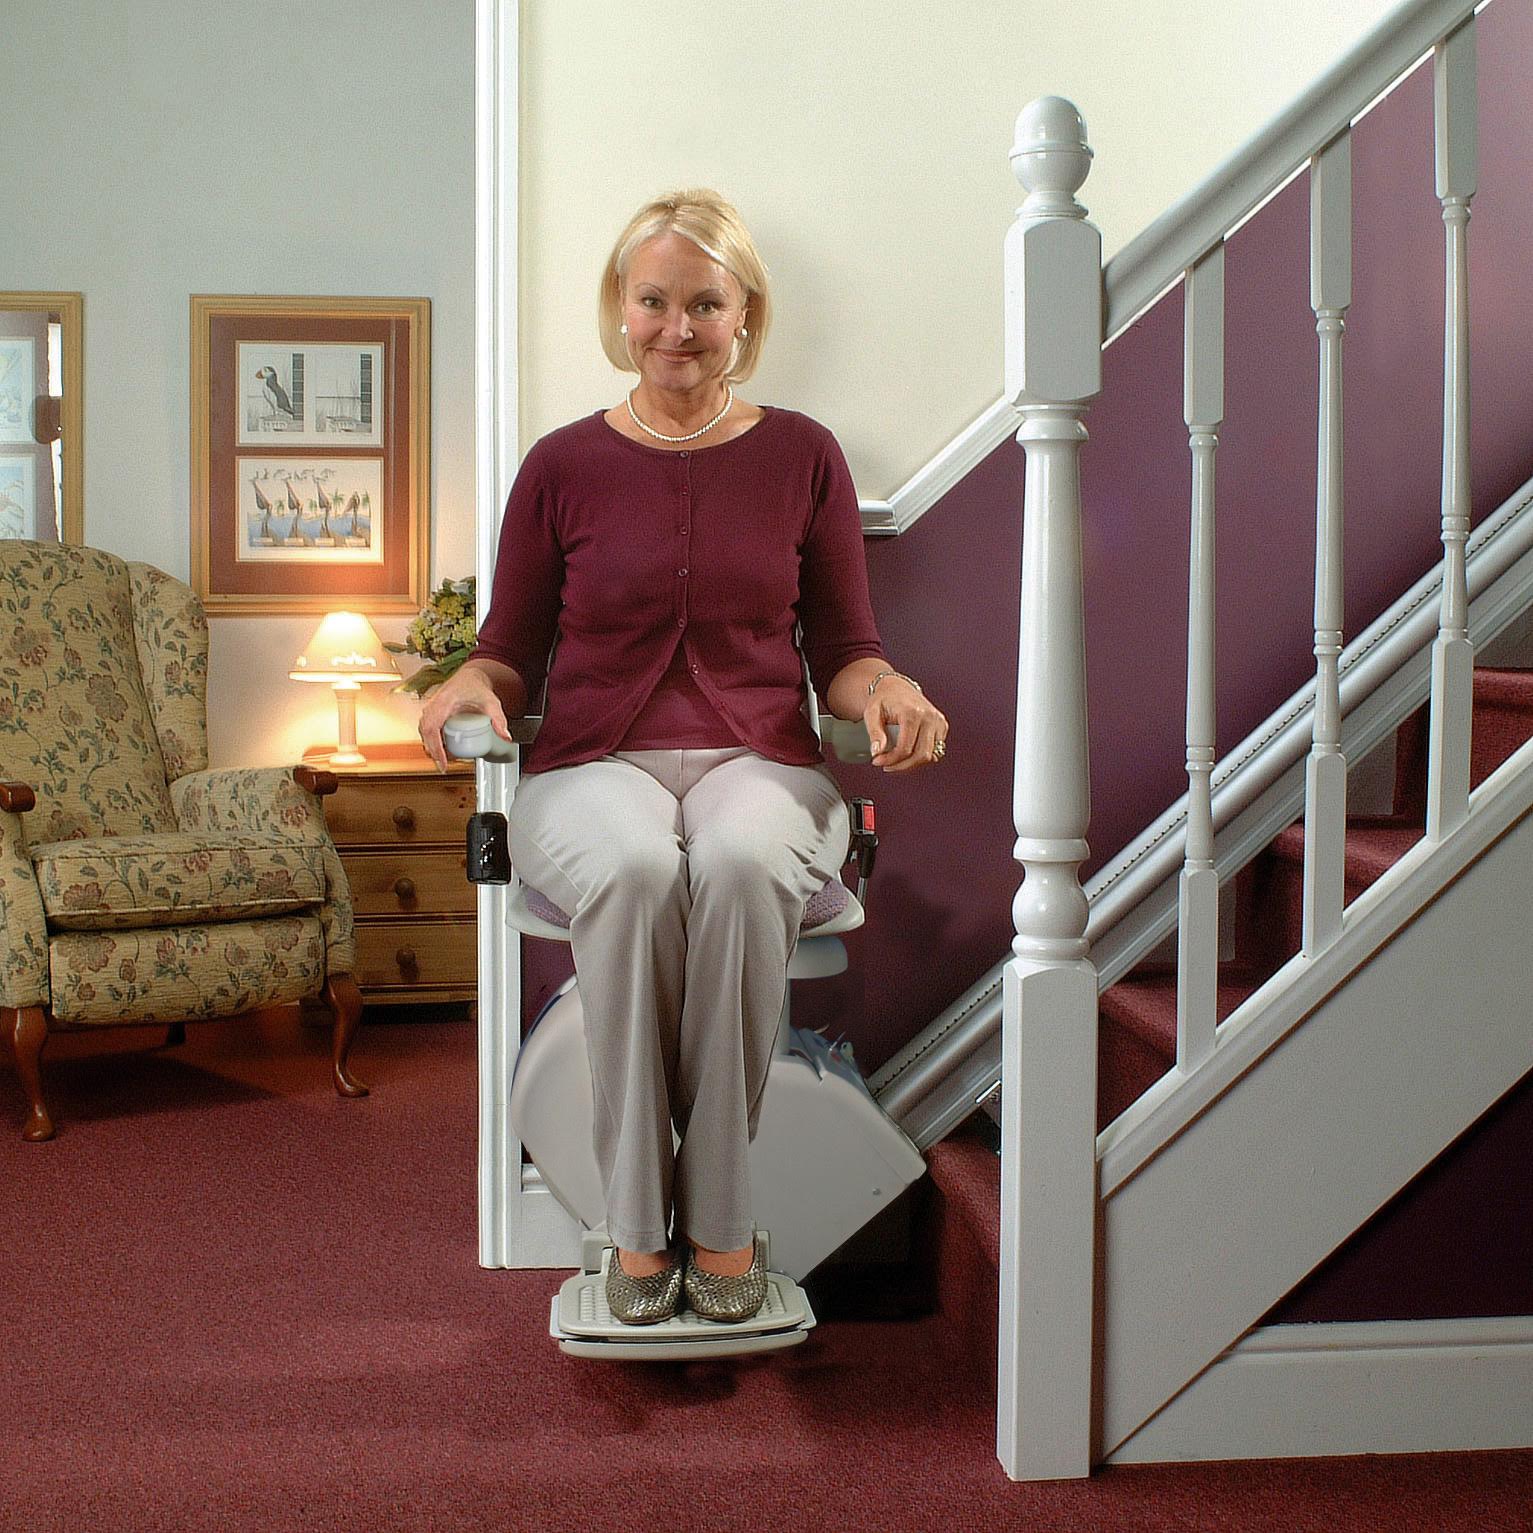 Burbank Stair Lift are home residential indoor stairway staircase glides